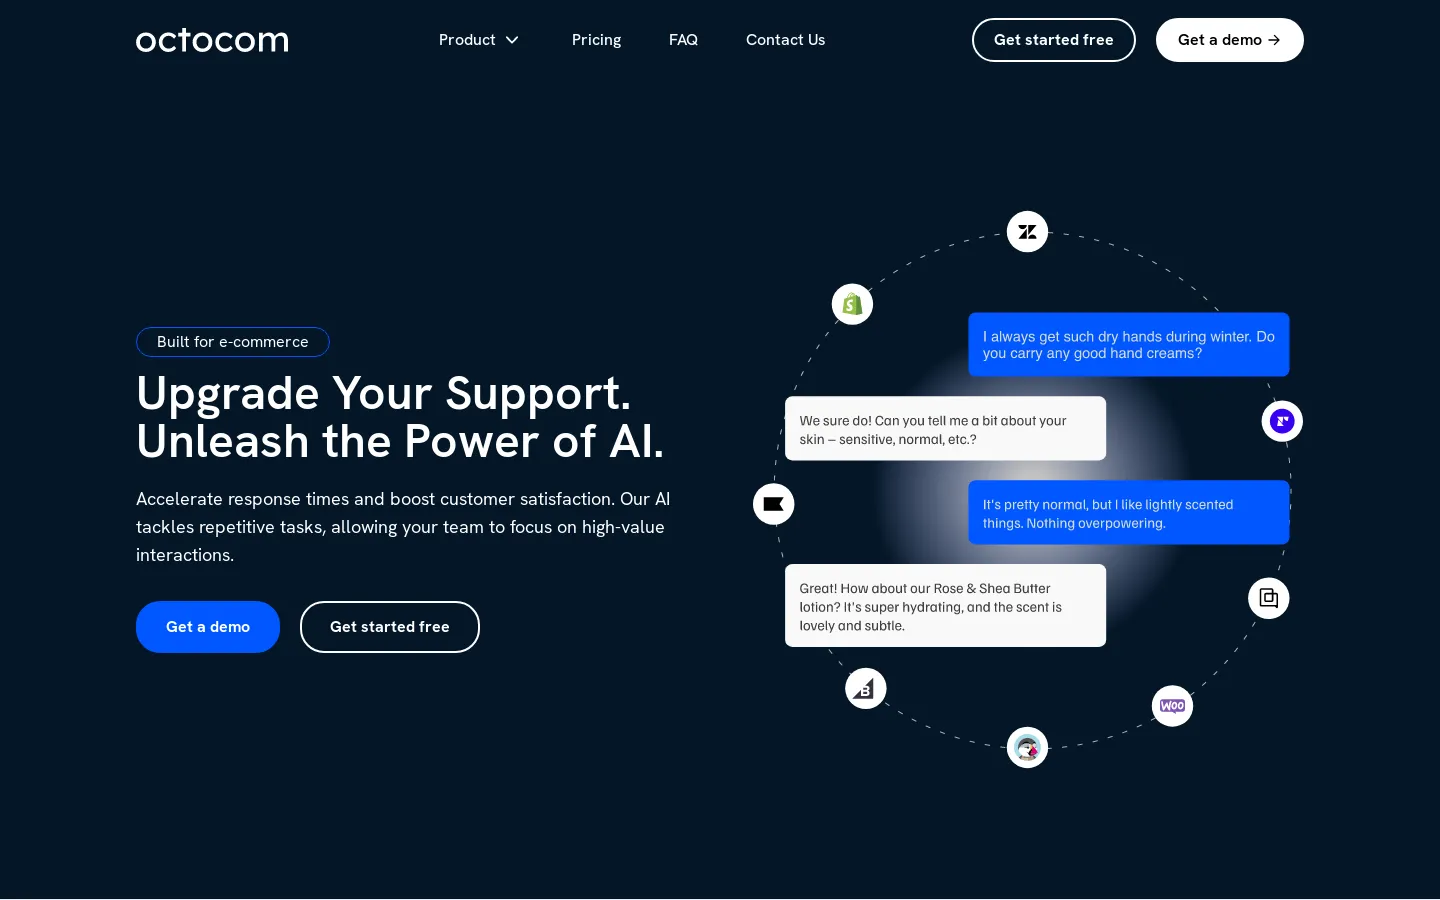 Octocom - GPT-powered AI chatbot for eCommerce SMEs